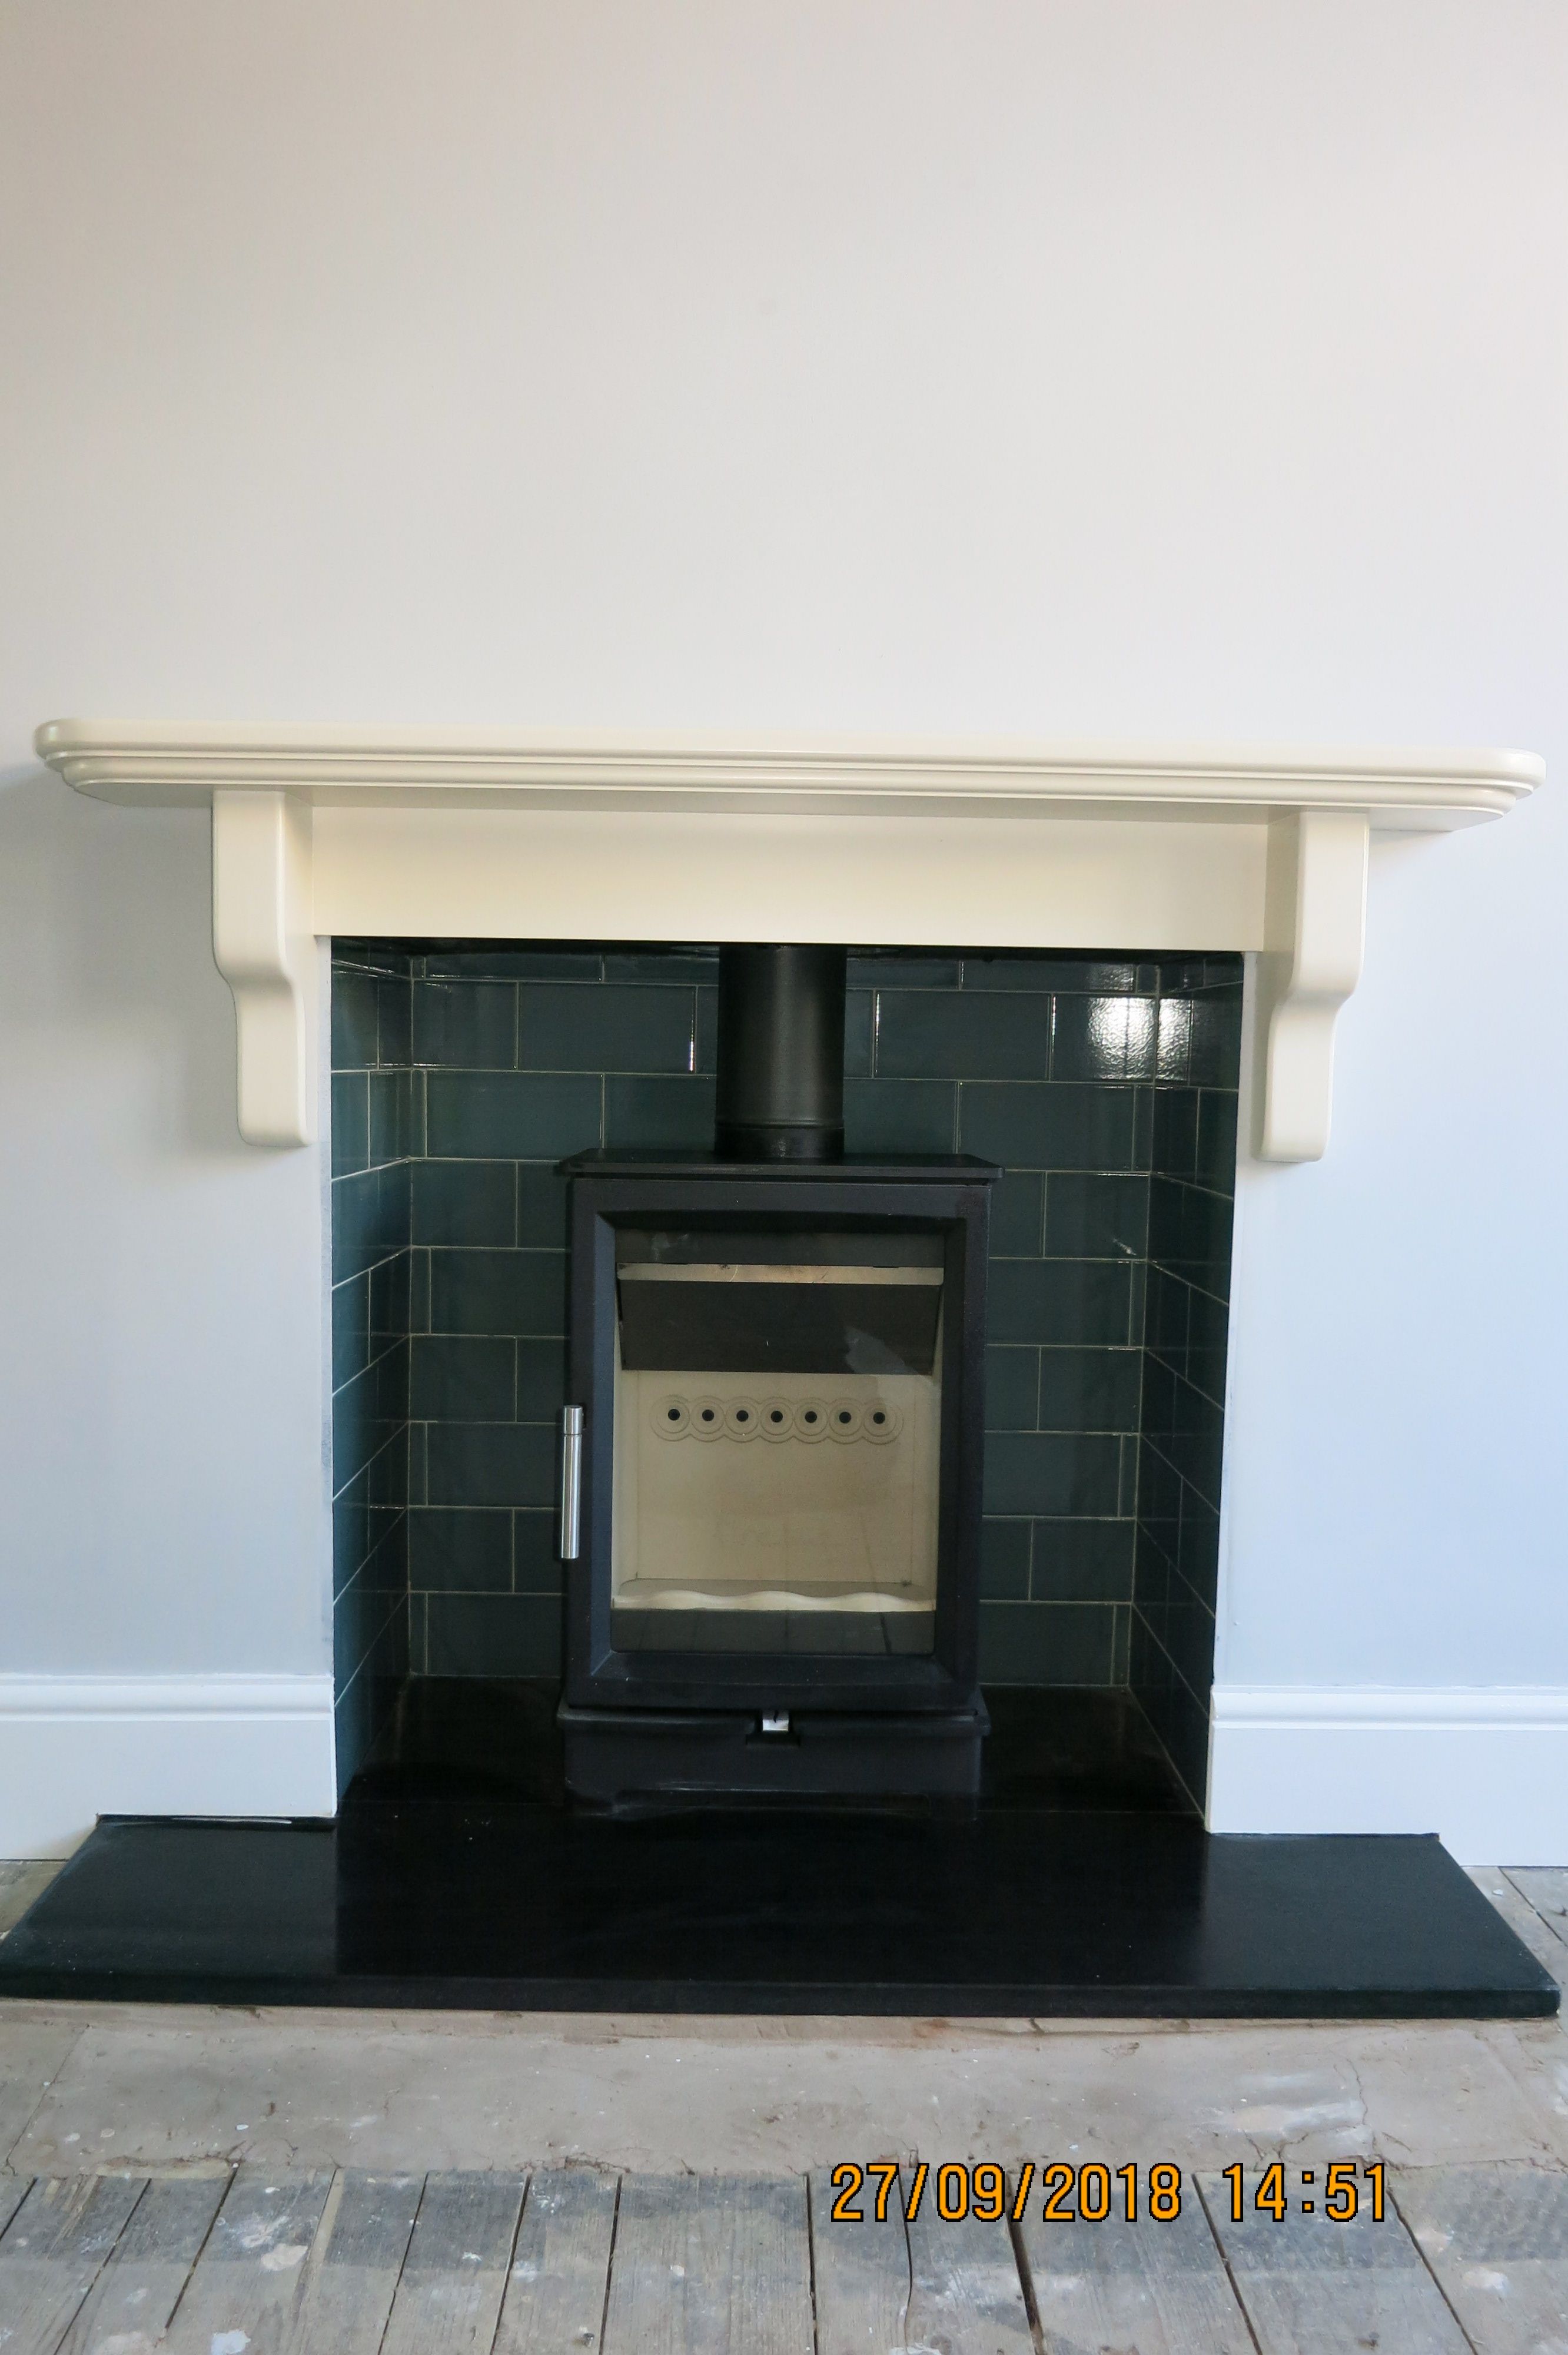 Antique White Fireplace Inspirational How Nice is This A Woodtec 5kw Wood Burning Stove Green